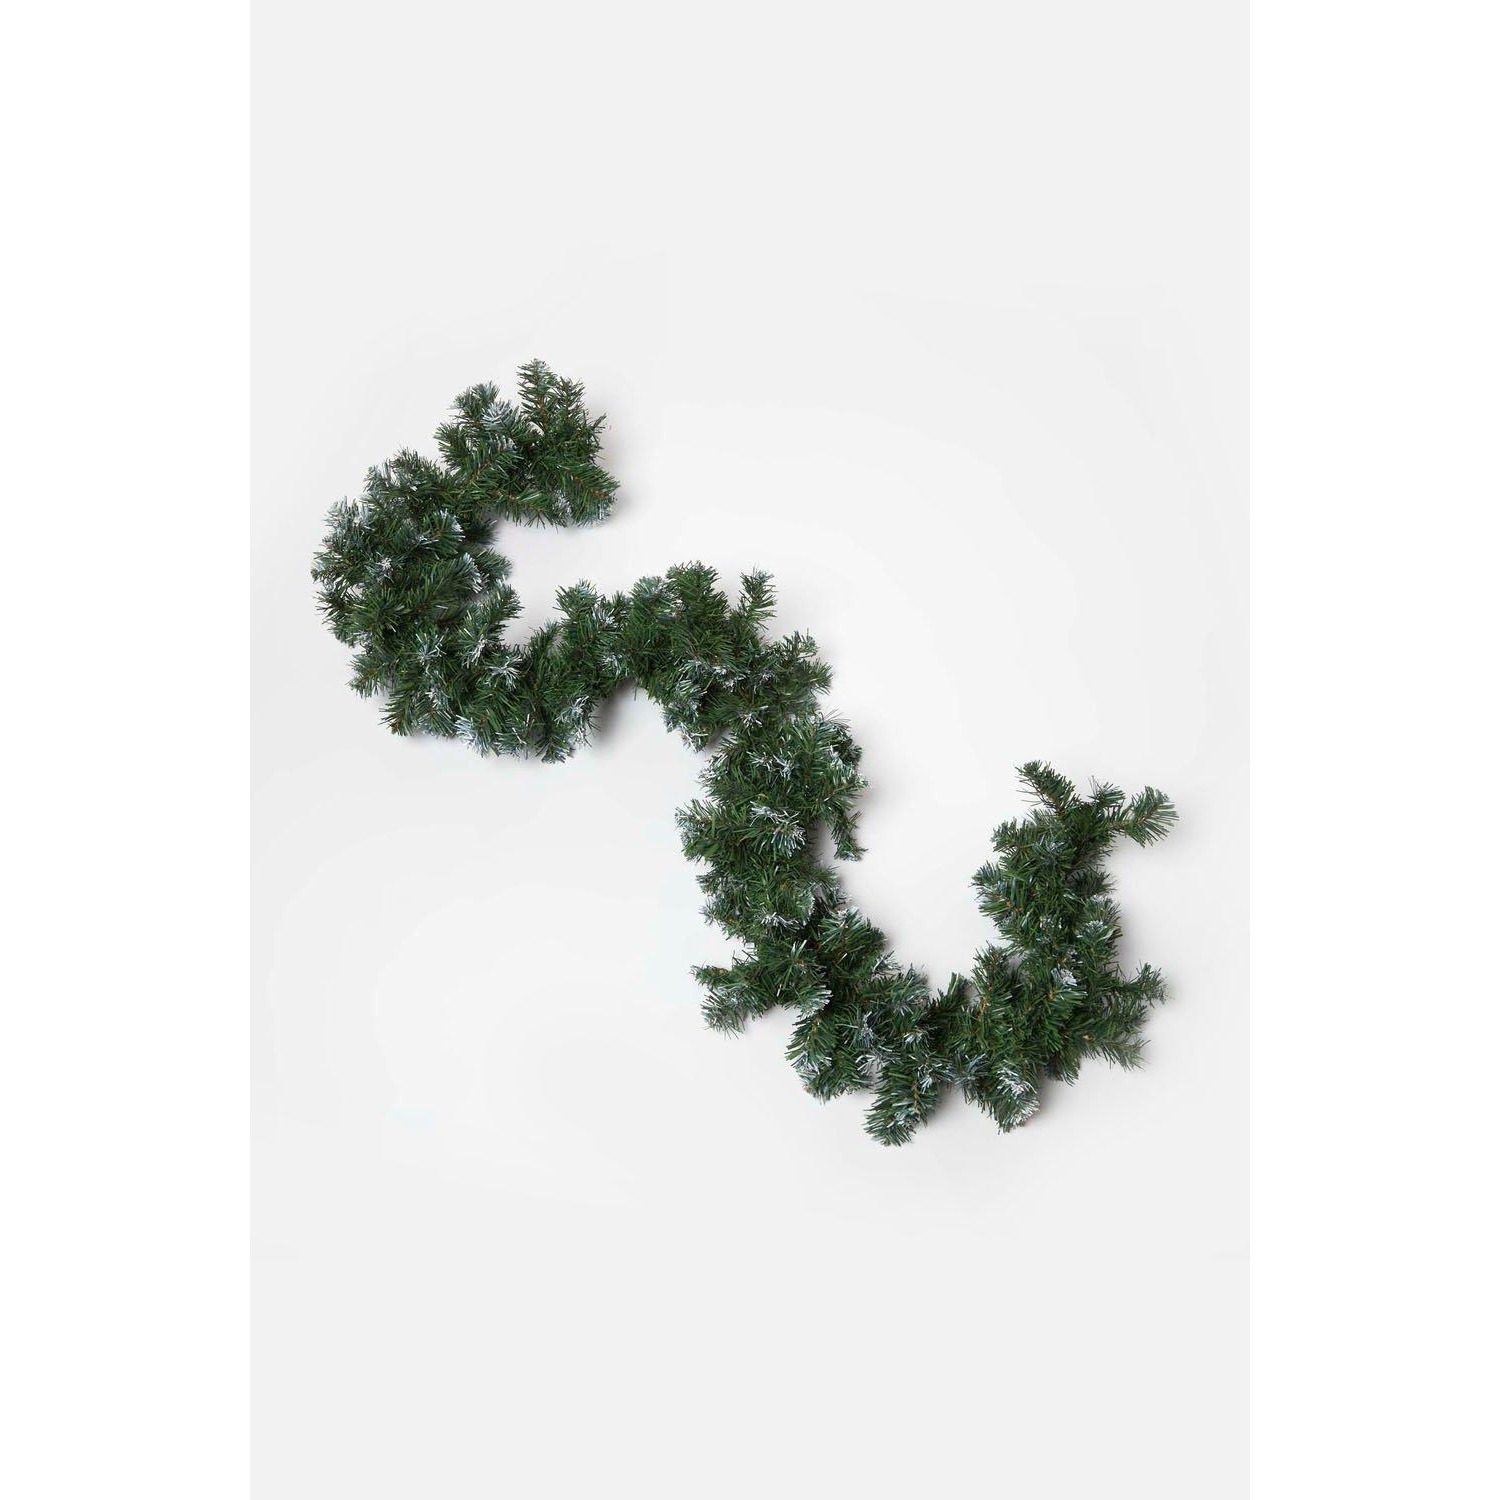 Green Snow Dusted Christmas Wreath, 18 Inches - image 1